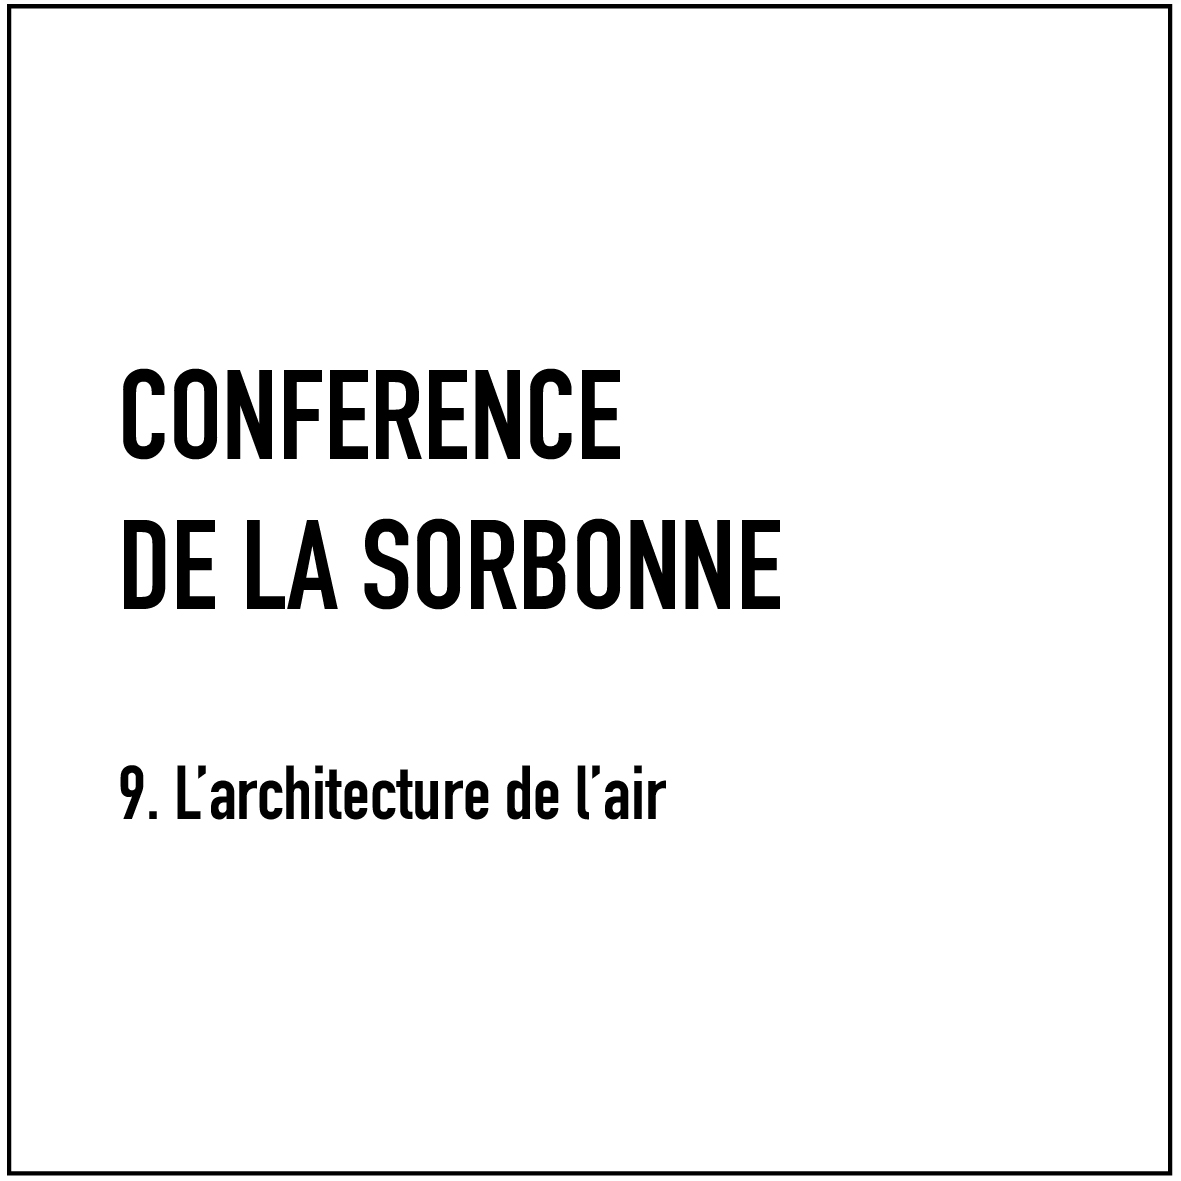 Lecture at the Sorbonne - 9. Air architecture